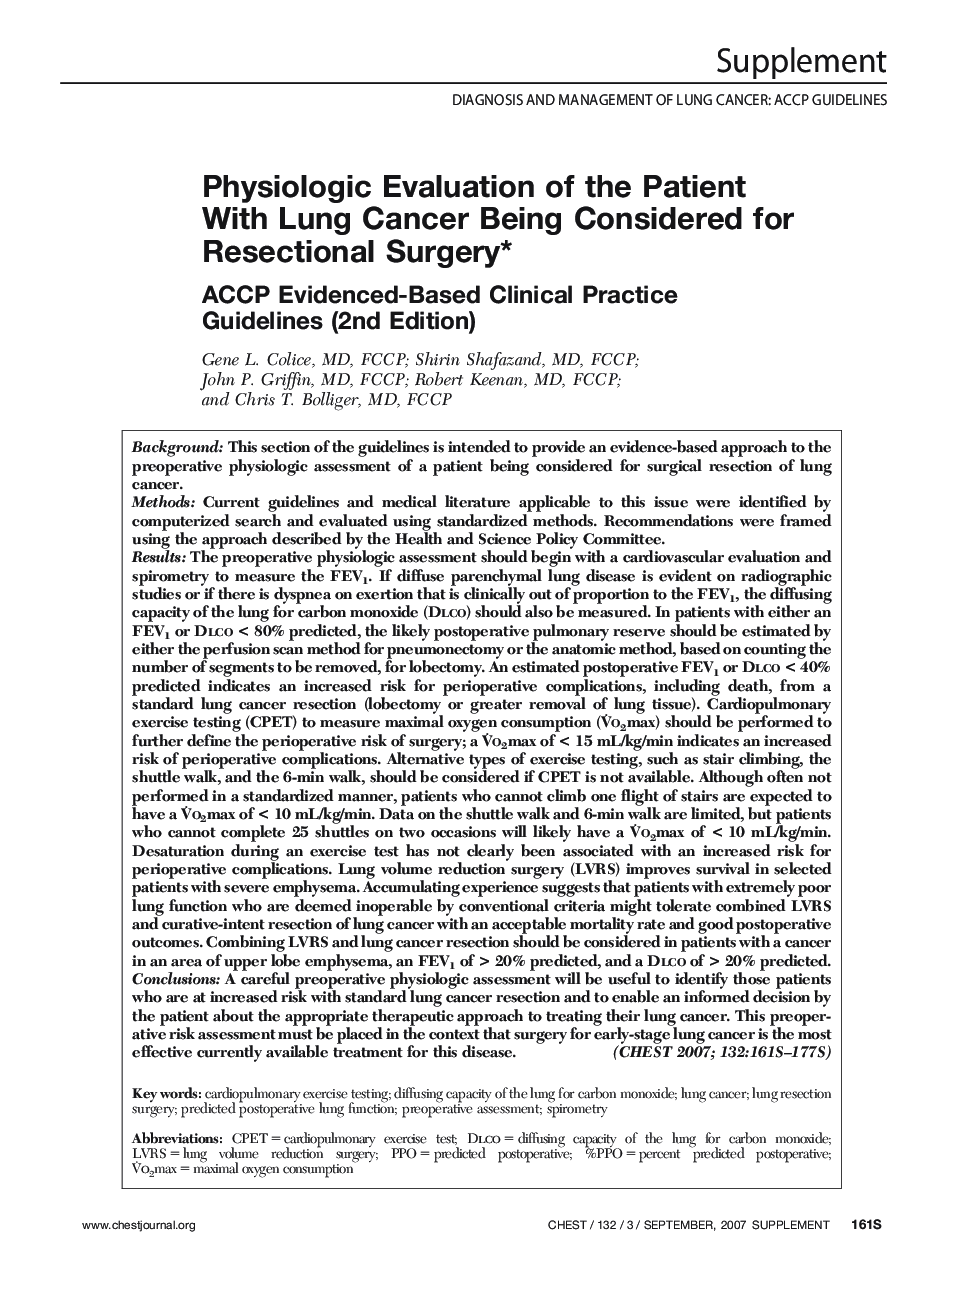 Physiologic Evaluation of the Patient With Lung Cancer Being Considered for Resectional Surgery : ACCP Evidenced-Based Clinical Practice Guidelines (2nd Edition)